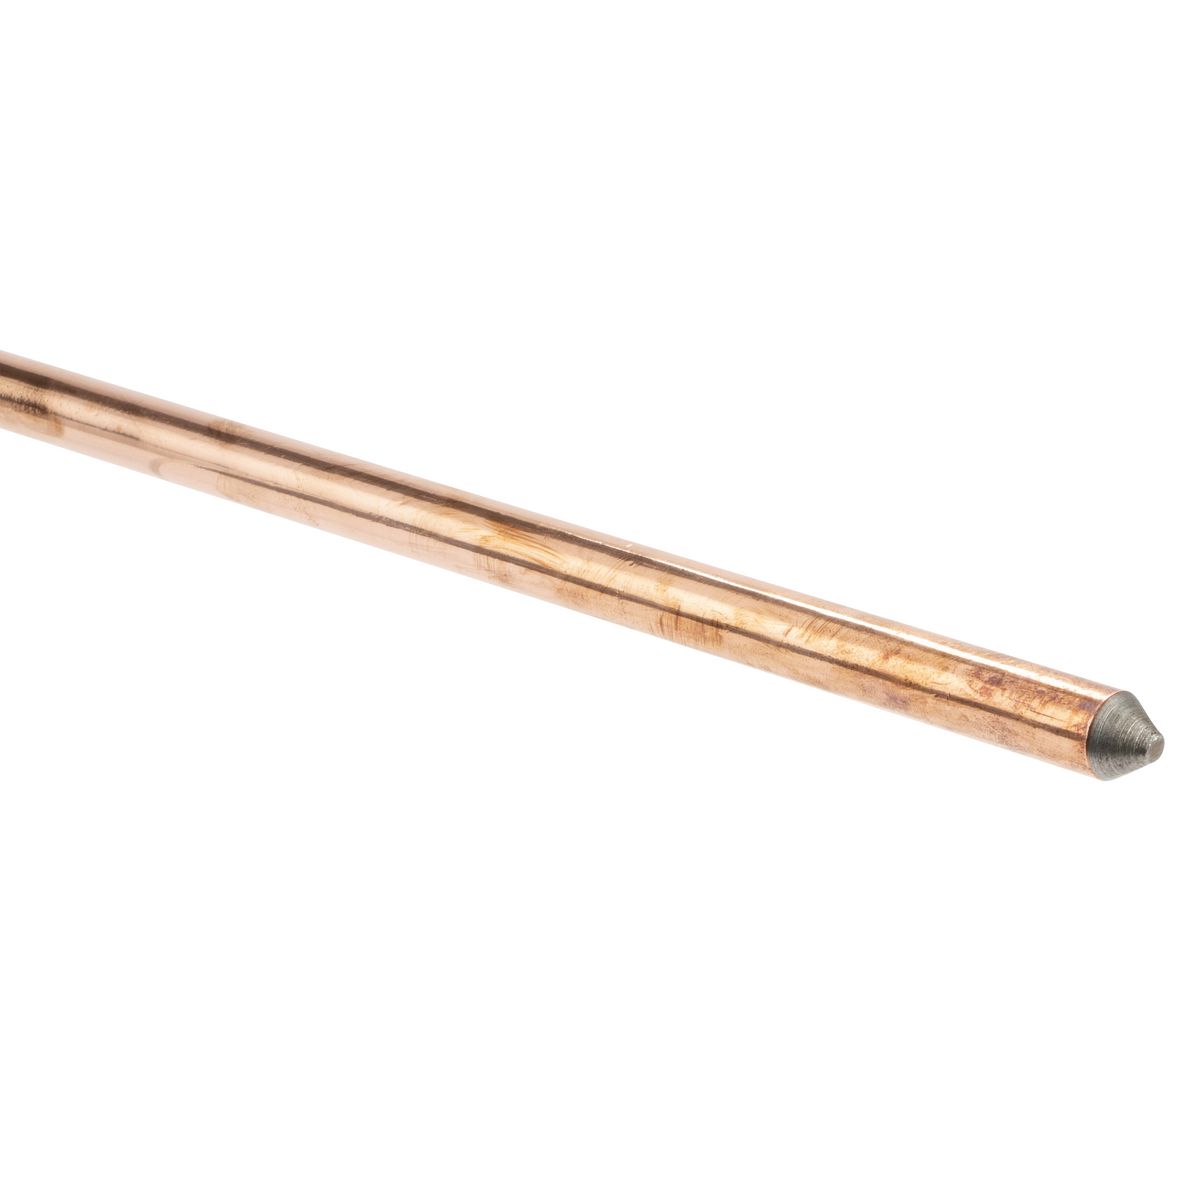 10mil COPPER-BONDED GROUND ROD, 3/4in x 6ft, UNTHREADED ENDS, C613460